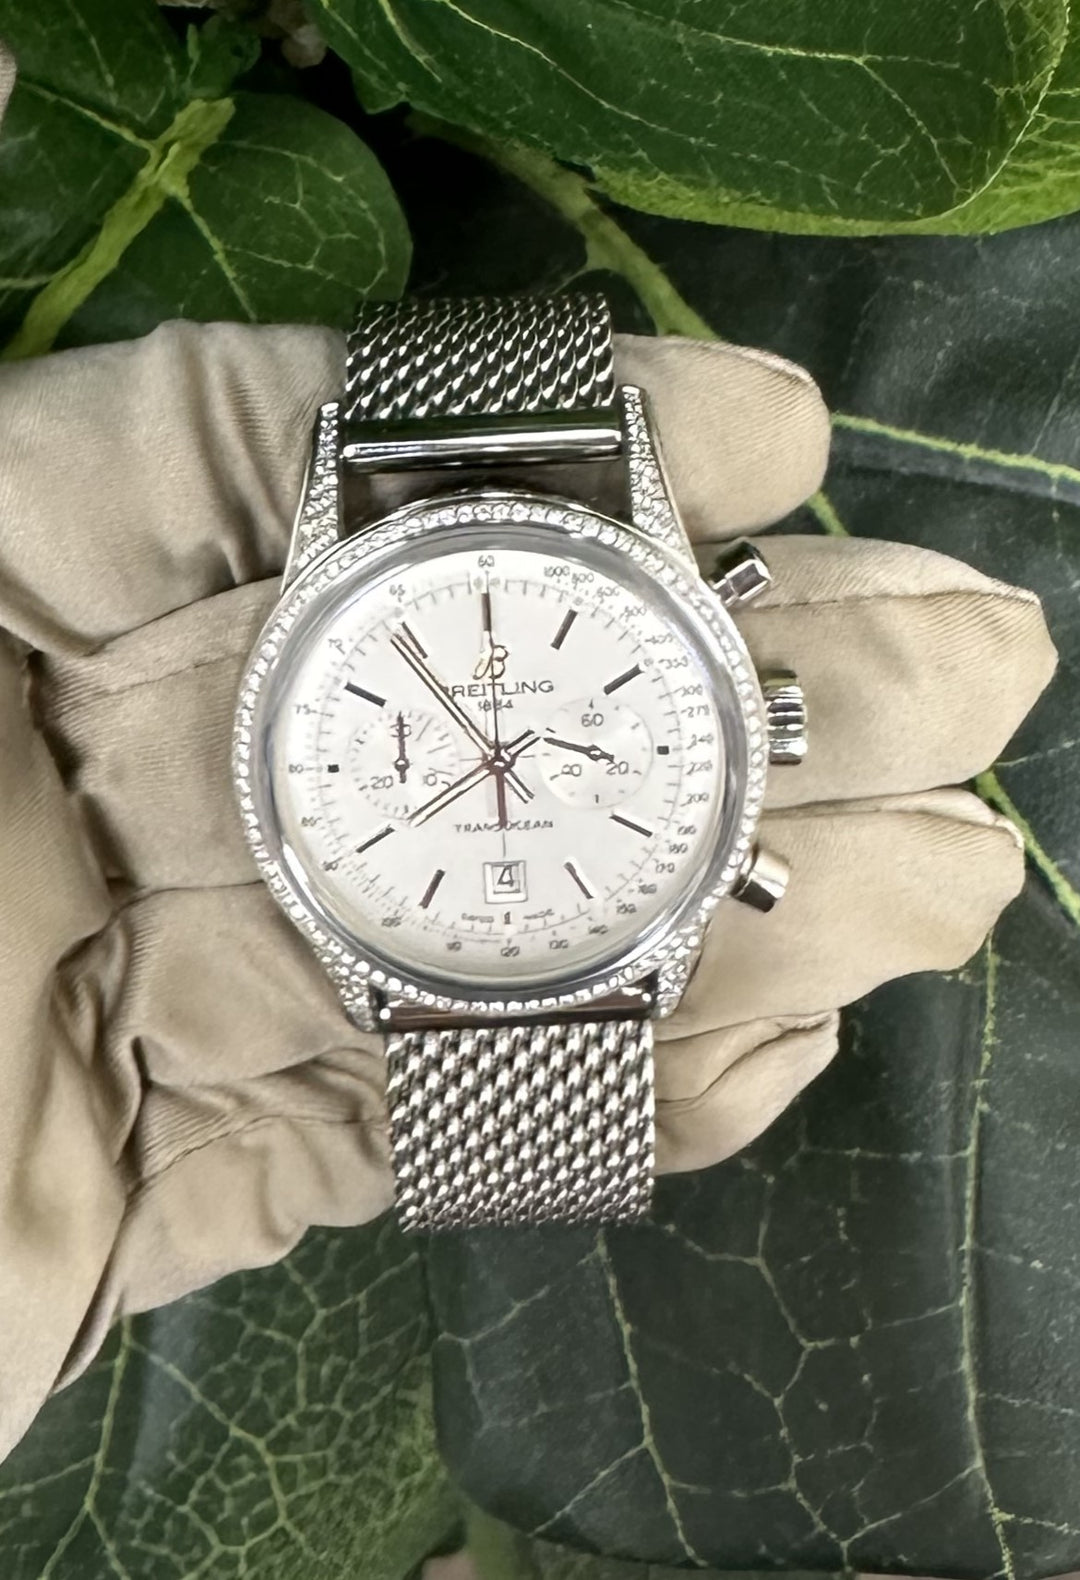 Breitling Transocean Chronograph Men's Stainless Steel Watch with Diamonds